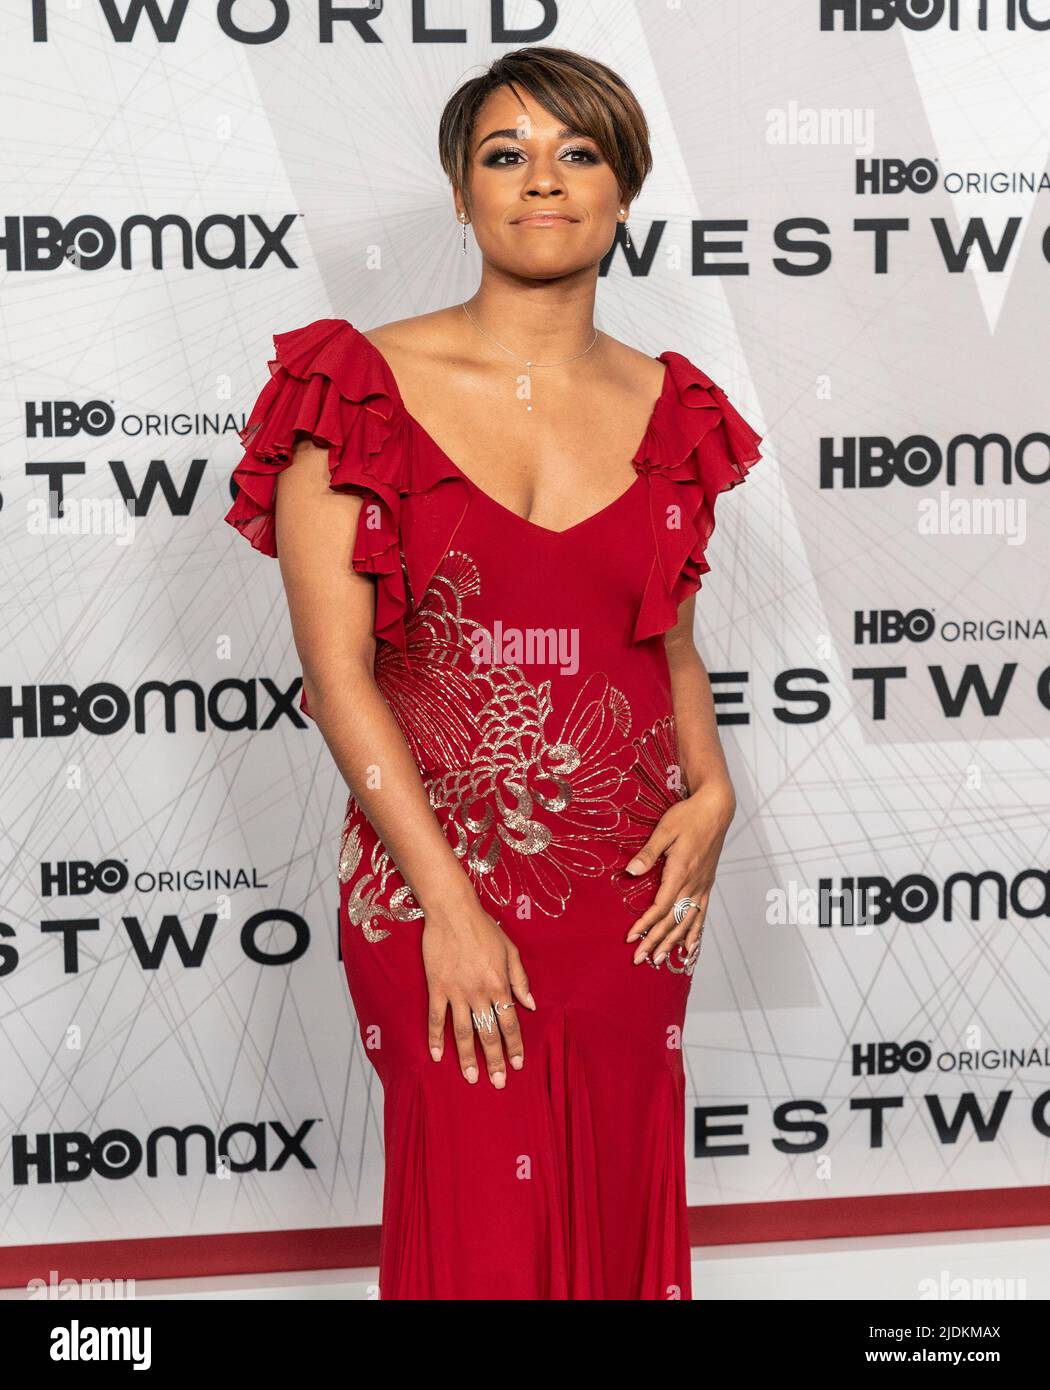 New York, USA. 21st June, 2022. Ariana DeBose wearing dress by John Galliano attends Westworld Season 4 by HBO Max premiere are Alice Tully Hall in New York on June 21, 022. (Photo by Lev Radin/Sipa USA) Credit: Sipa USA/Alamy Live News Stock Photo